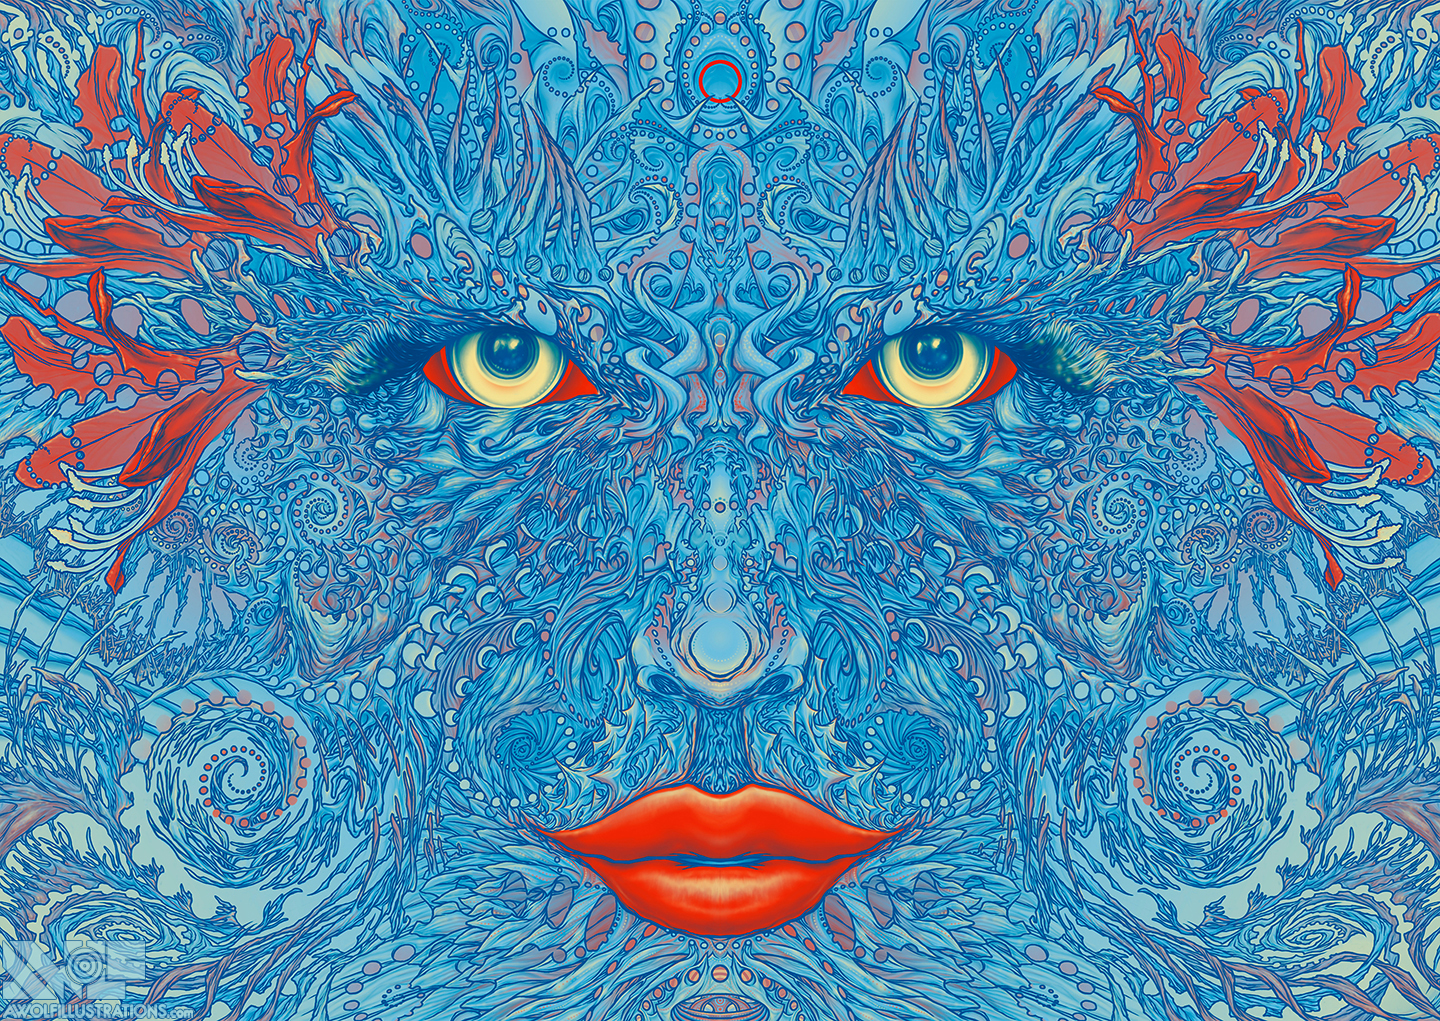 A digital artwork by Aaron Wolf of a portrait of the face of mother nature. Available as a jigsaw puzzle by Pandemic Puzzles